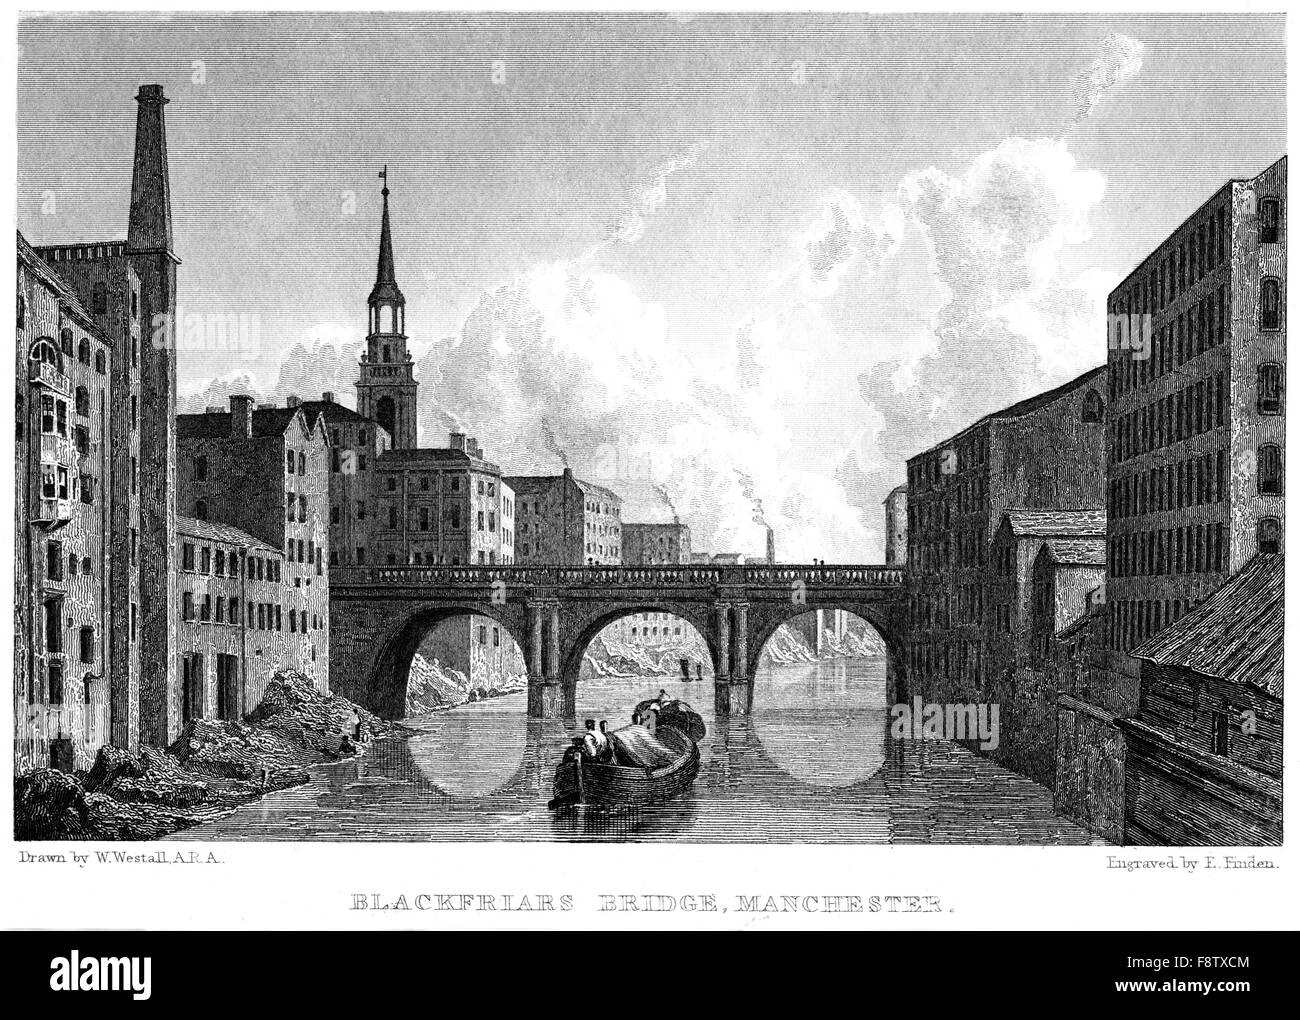 An engraving of Blackfriars Bridge, Manchester scanned at high resolution from a book printed in 1834. Believed copyright free. Stock Photo